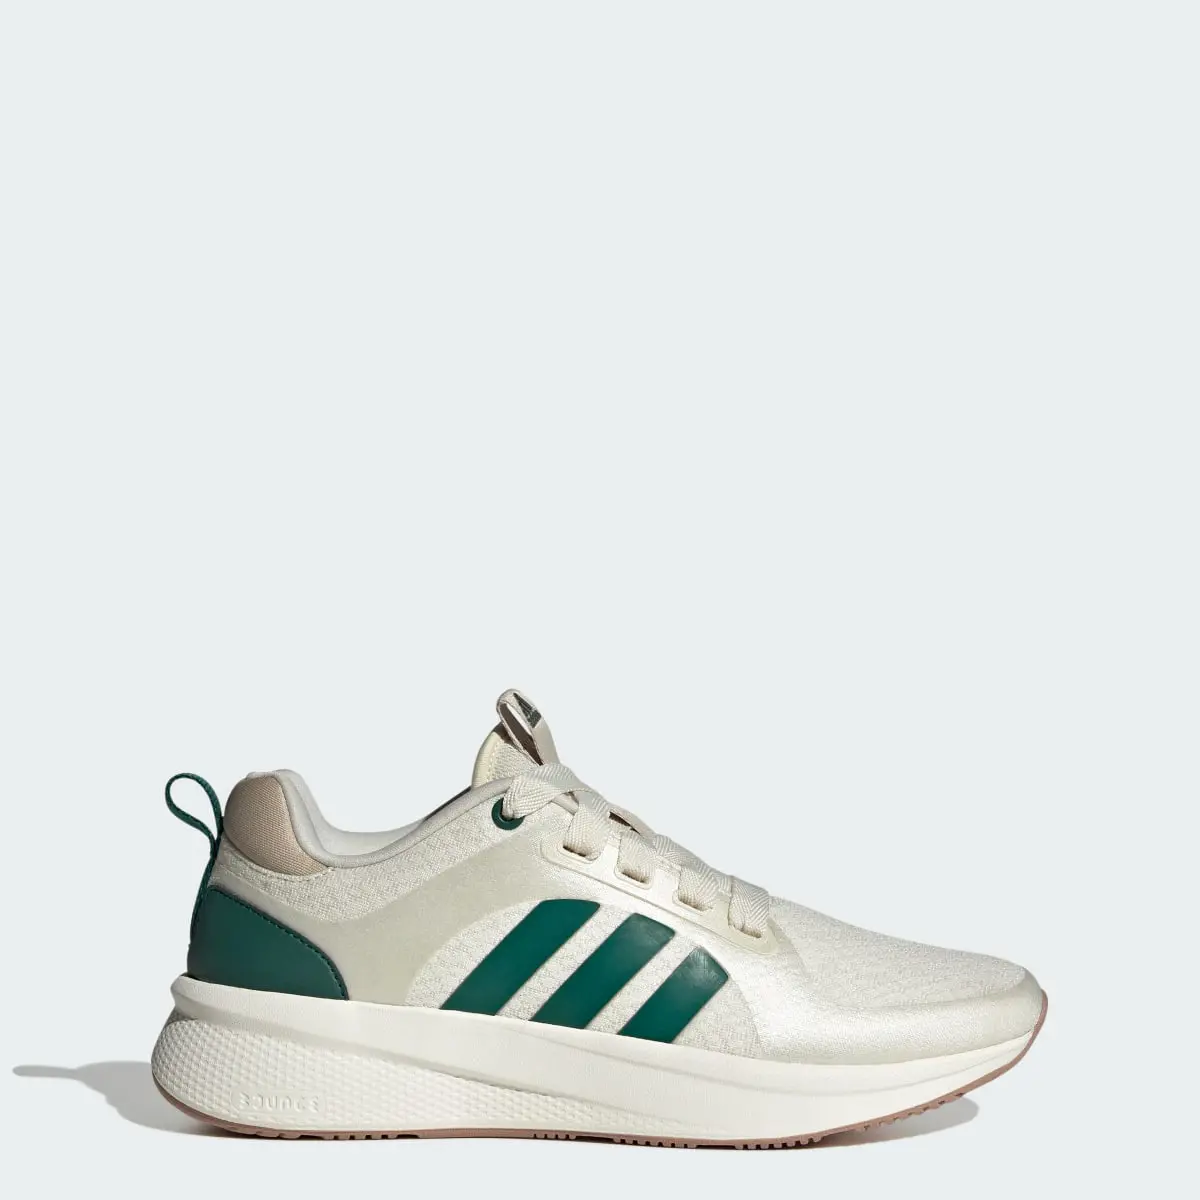 Adidas Edge Lux 6.0 Shoes. 1